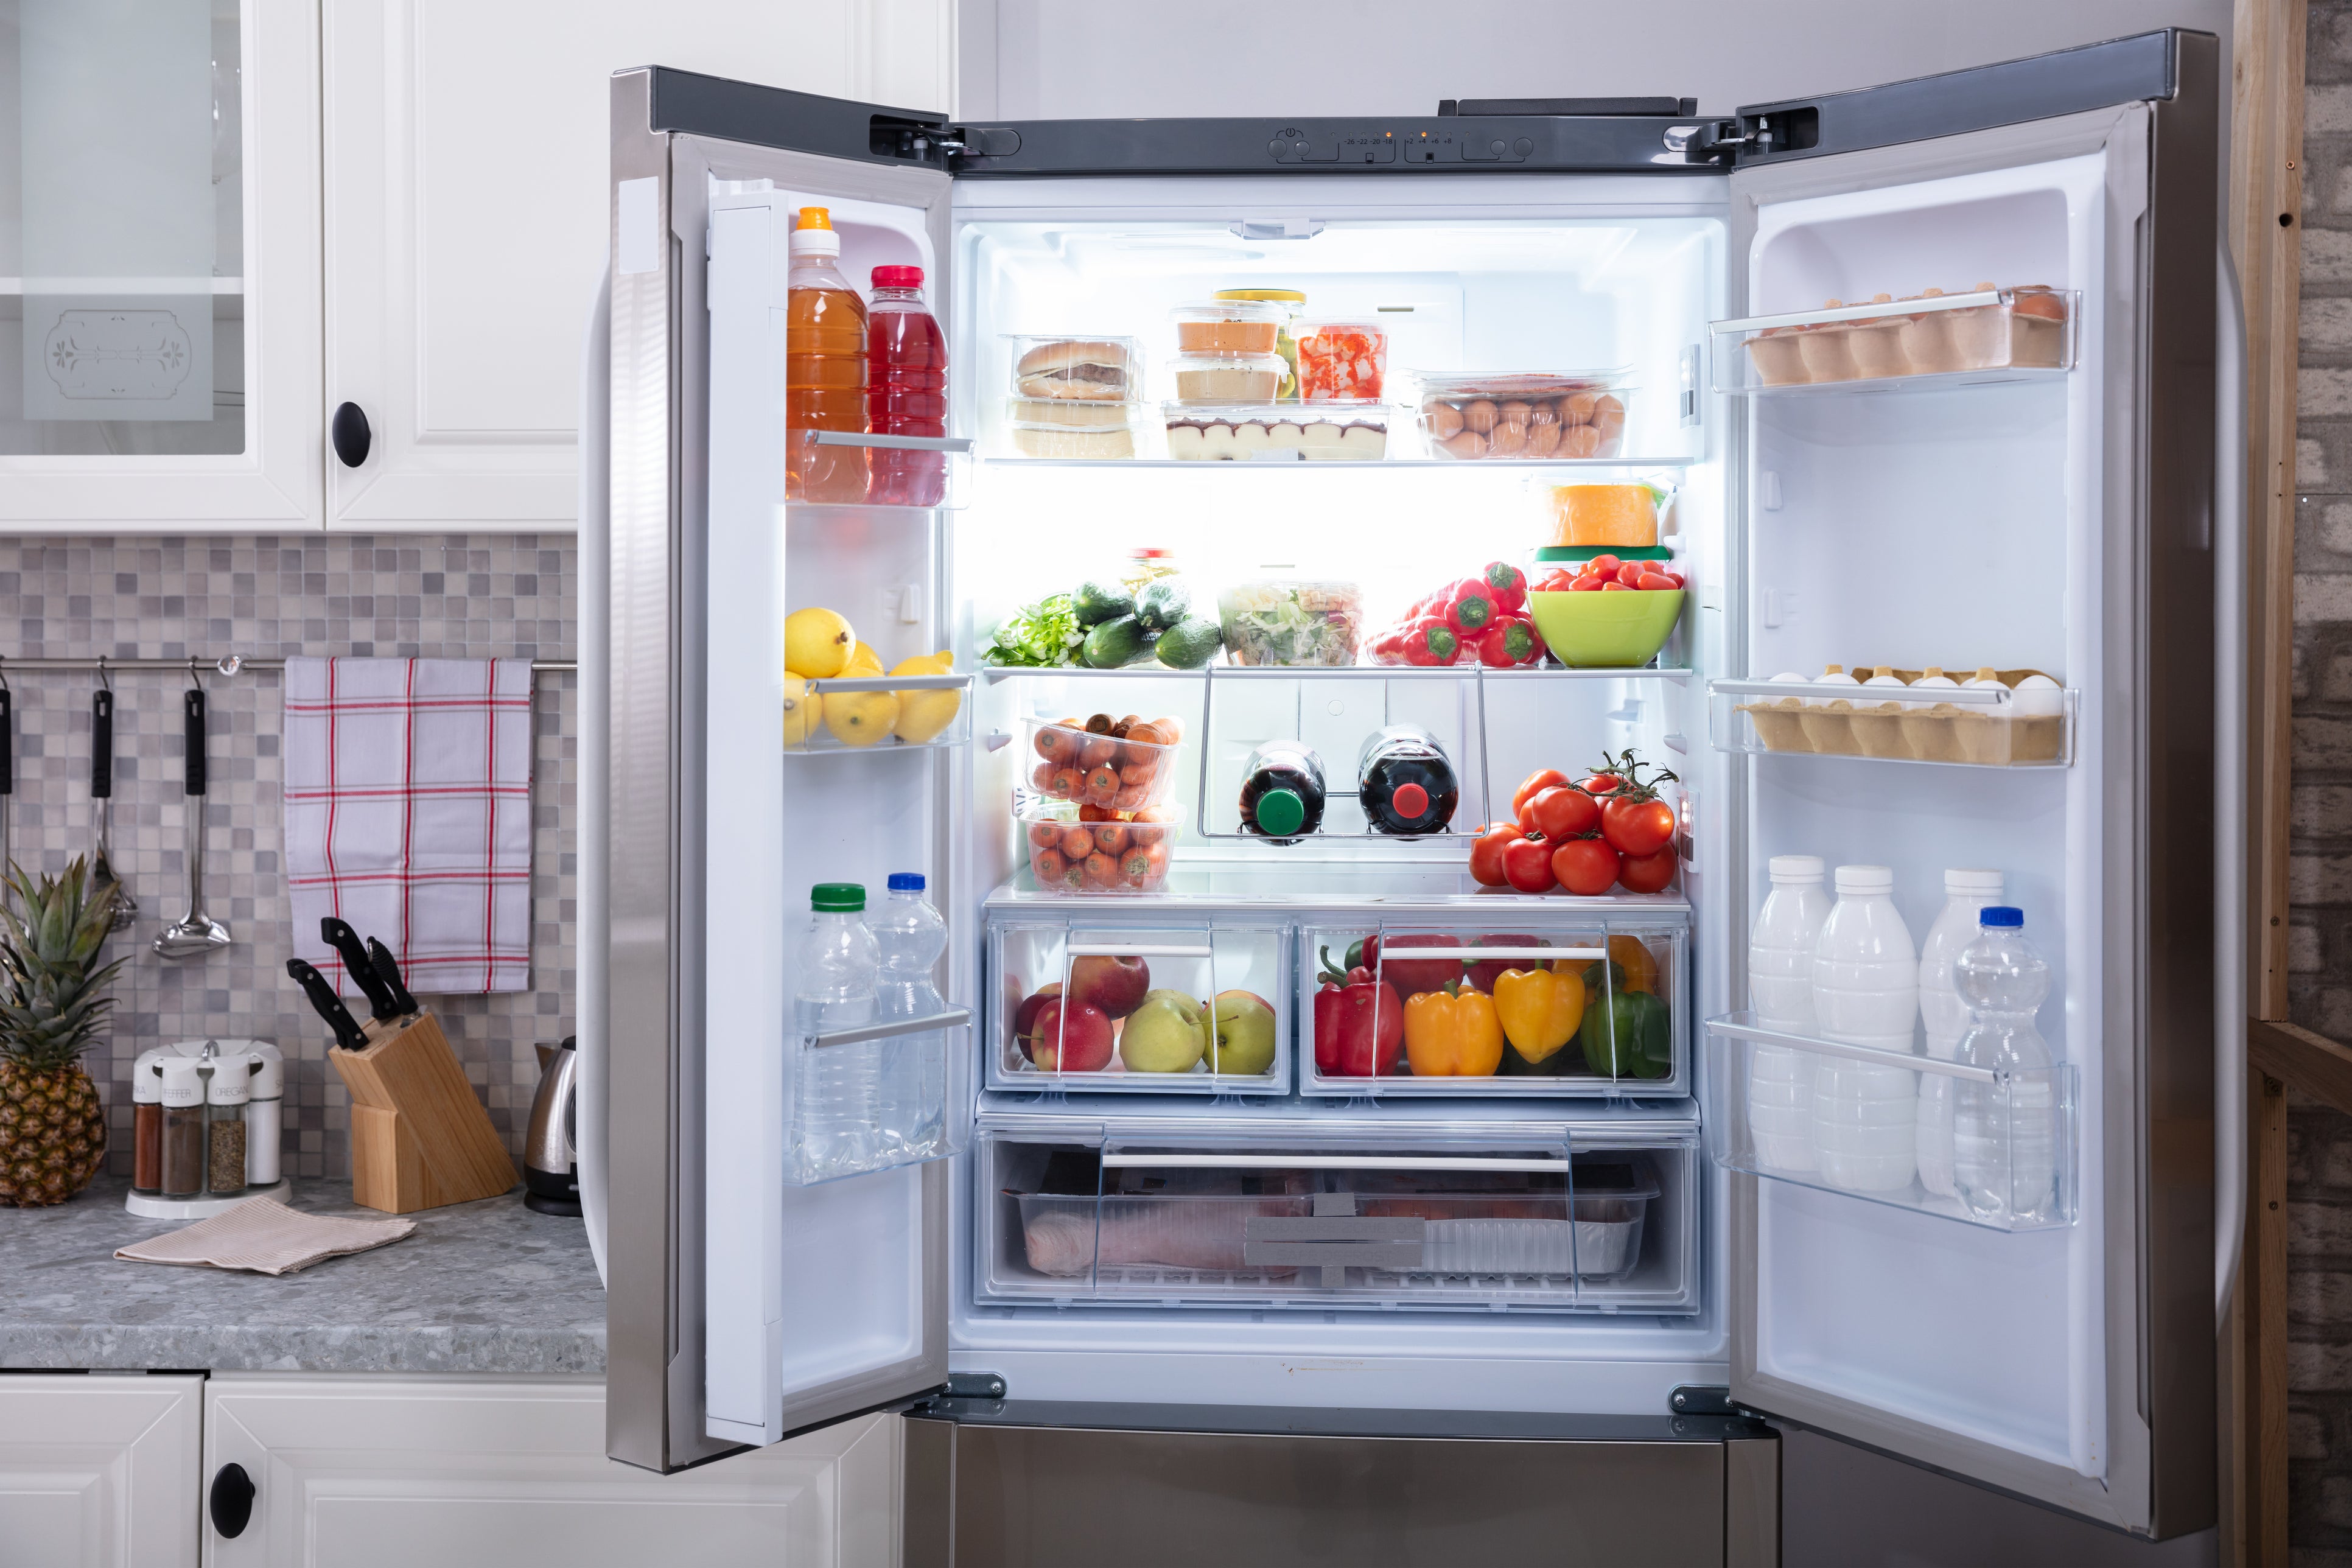 8 best refrigerators to upgrade your kitchen indy100 indy100